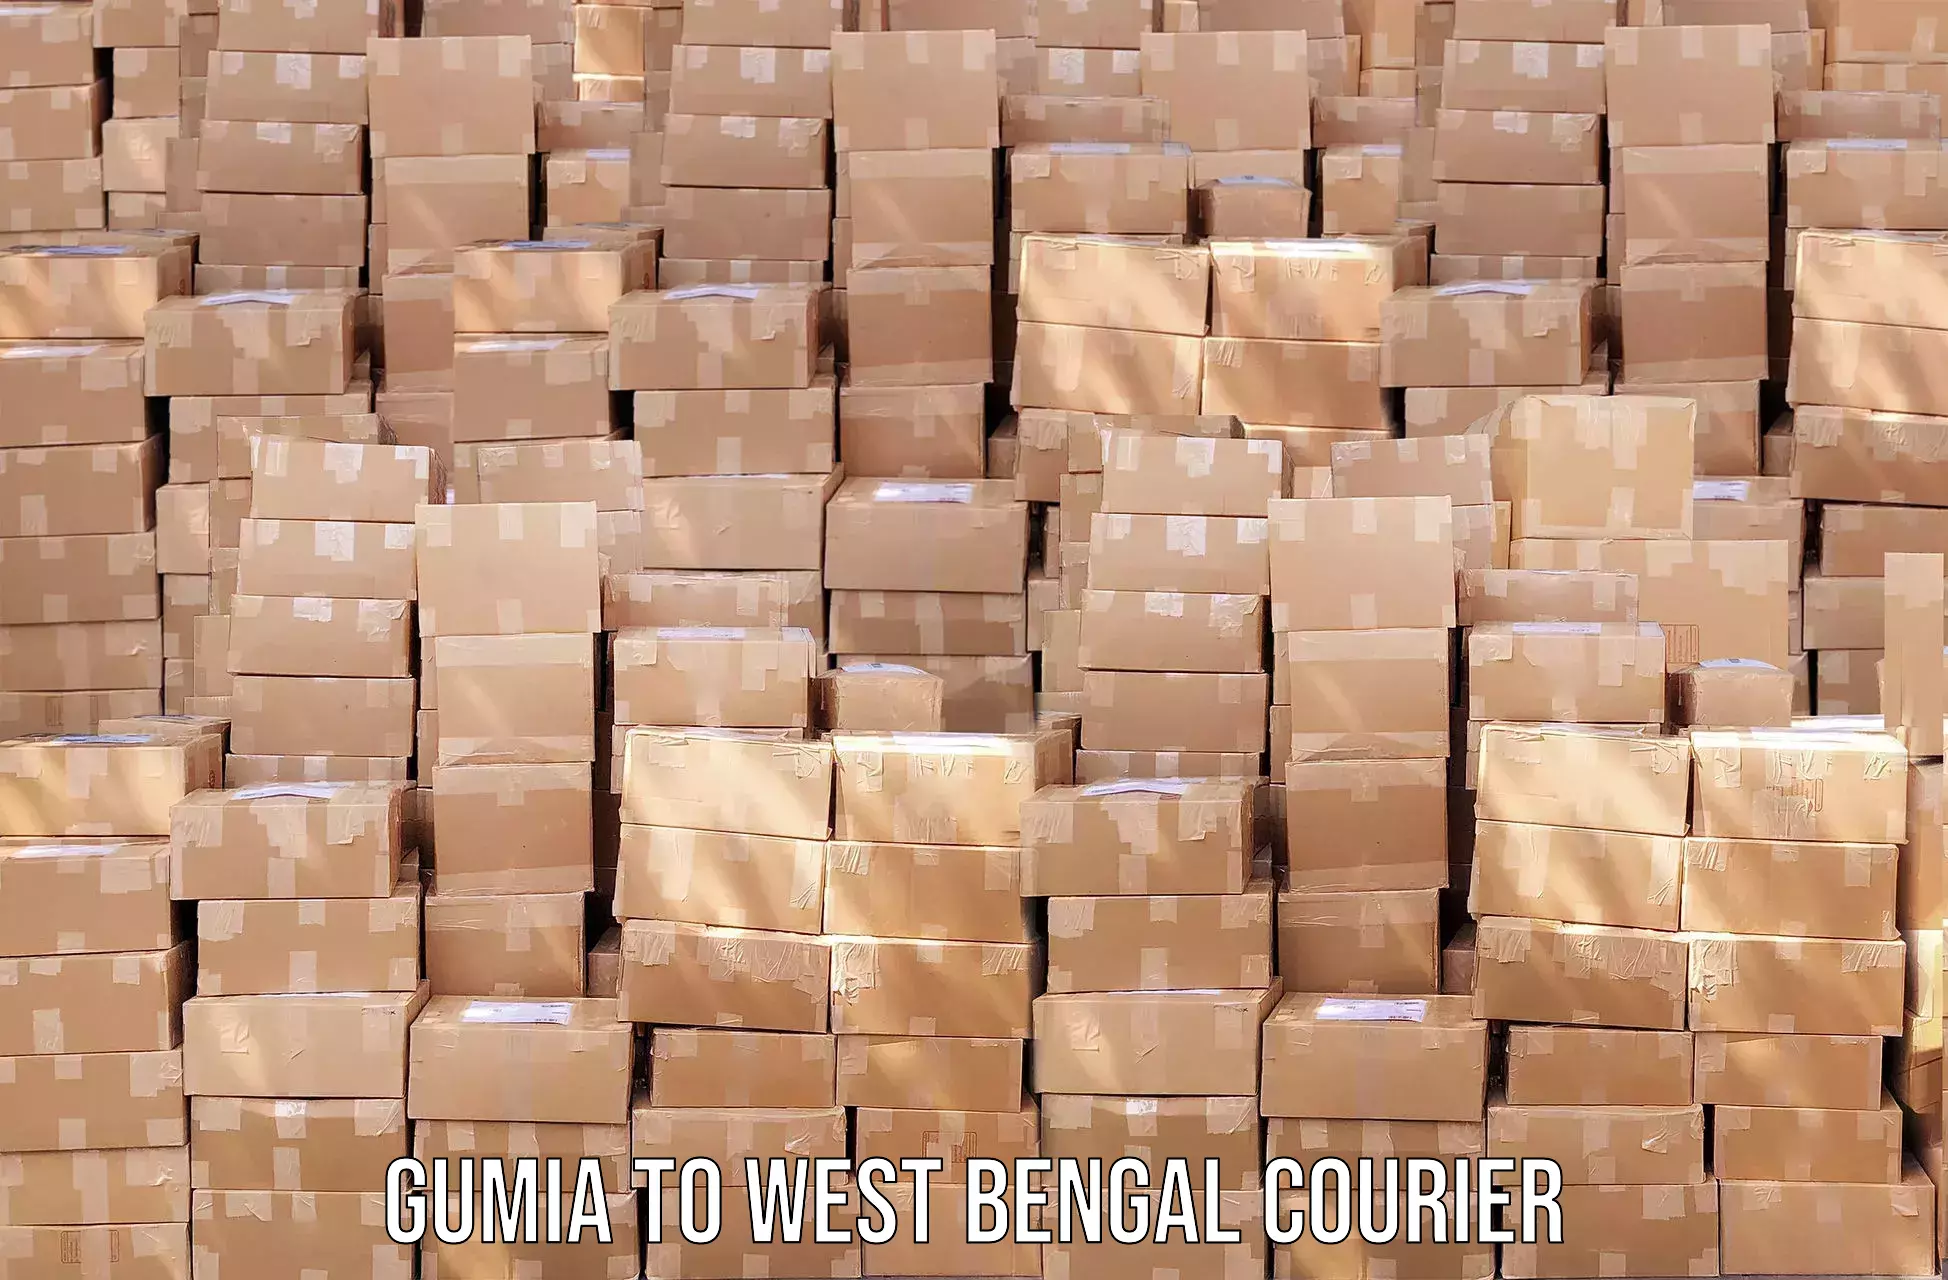 Courier service partnerships Gumia to West Bengal